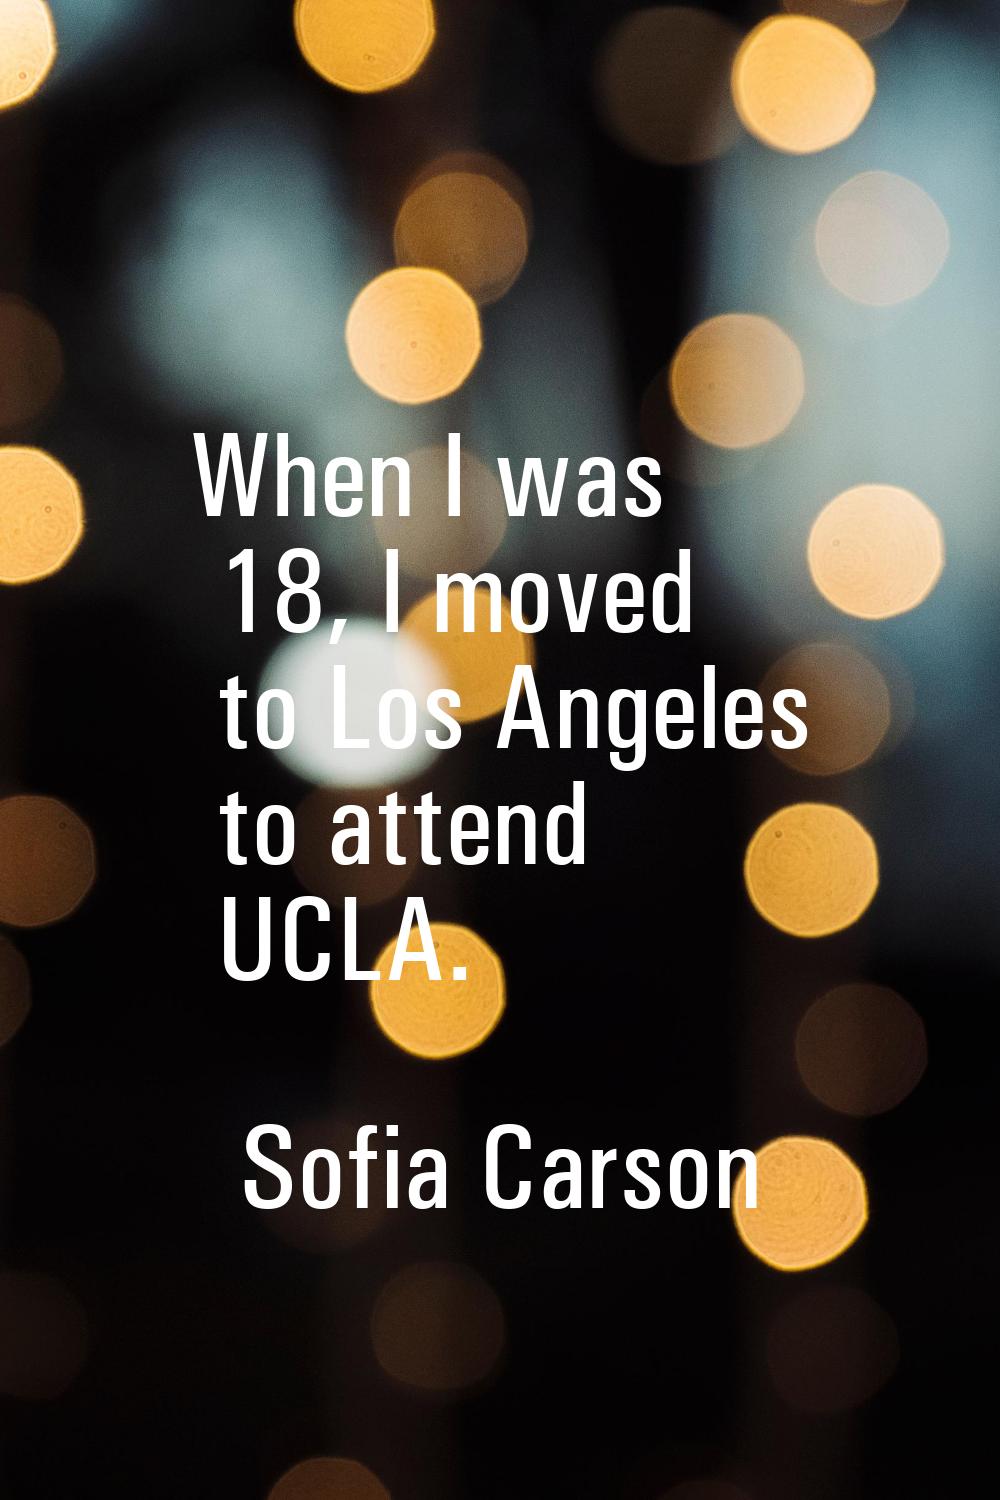 When I was 18, I moved to Los Angeles to attend UCLA.